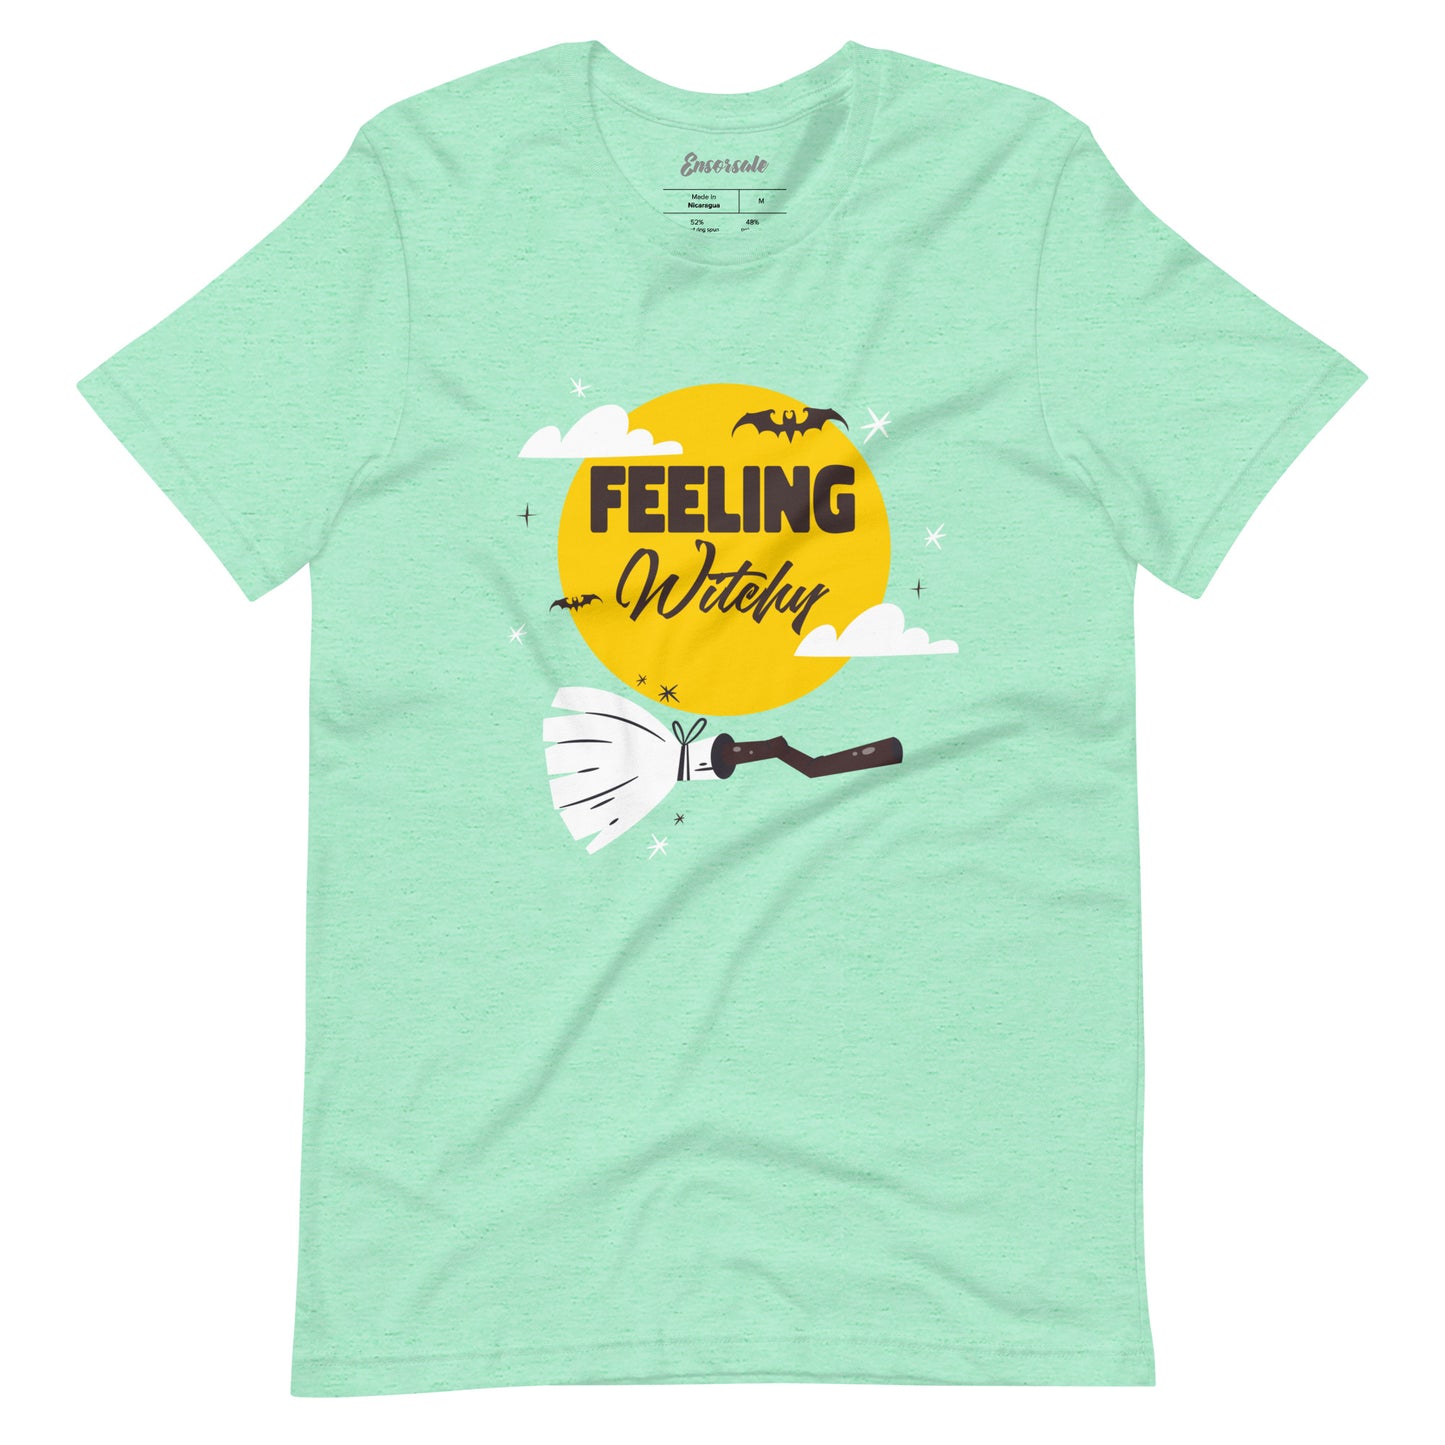 Feeling Witchy t-shirt